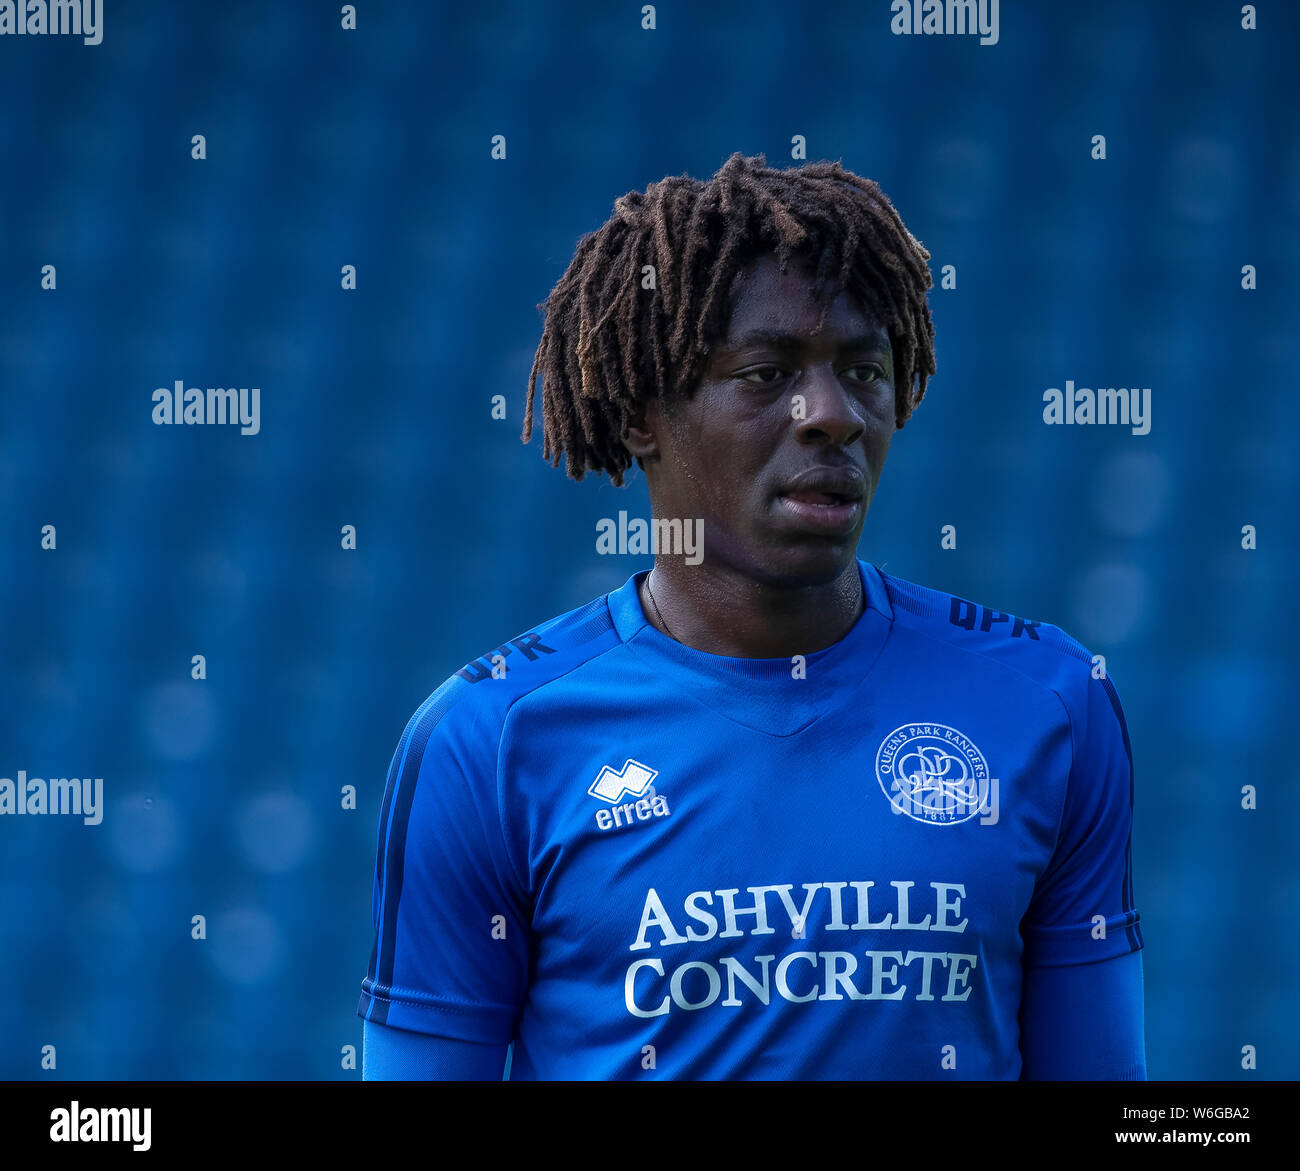 Head and shoulders image of young striker Ebere Eze of Queens Park Rangers FC in blue training kit. Blurred blue seats in the background. Stock Photo